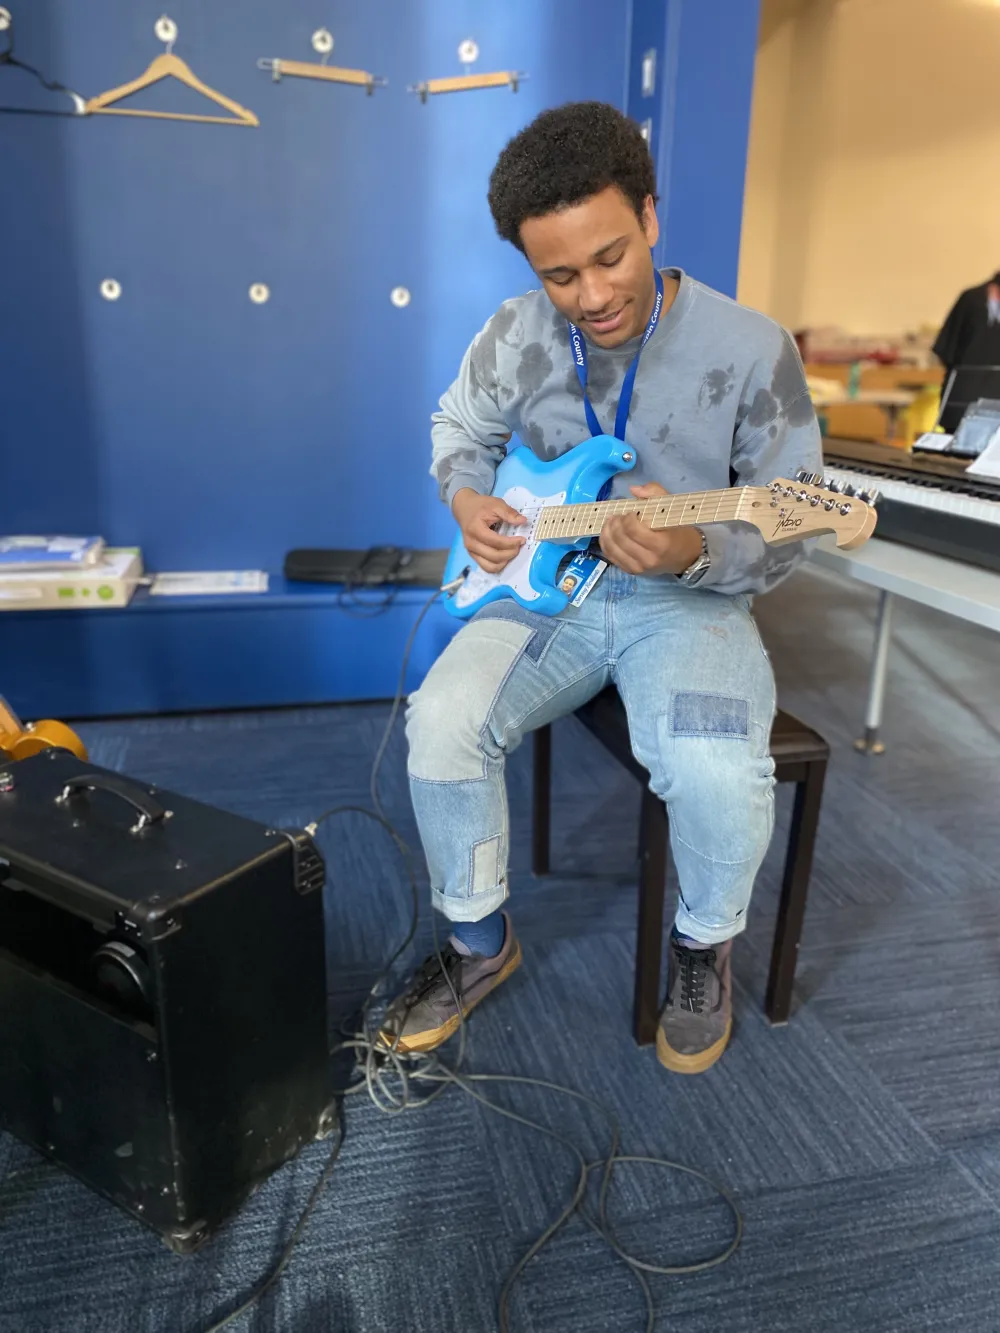 A young man plays an electric guitar, one of the features of Minneapolis Central Library's Best Buy Teen Tech Center